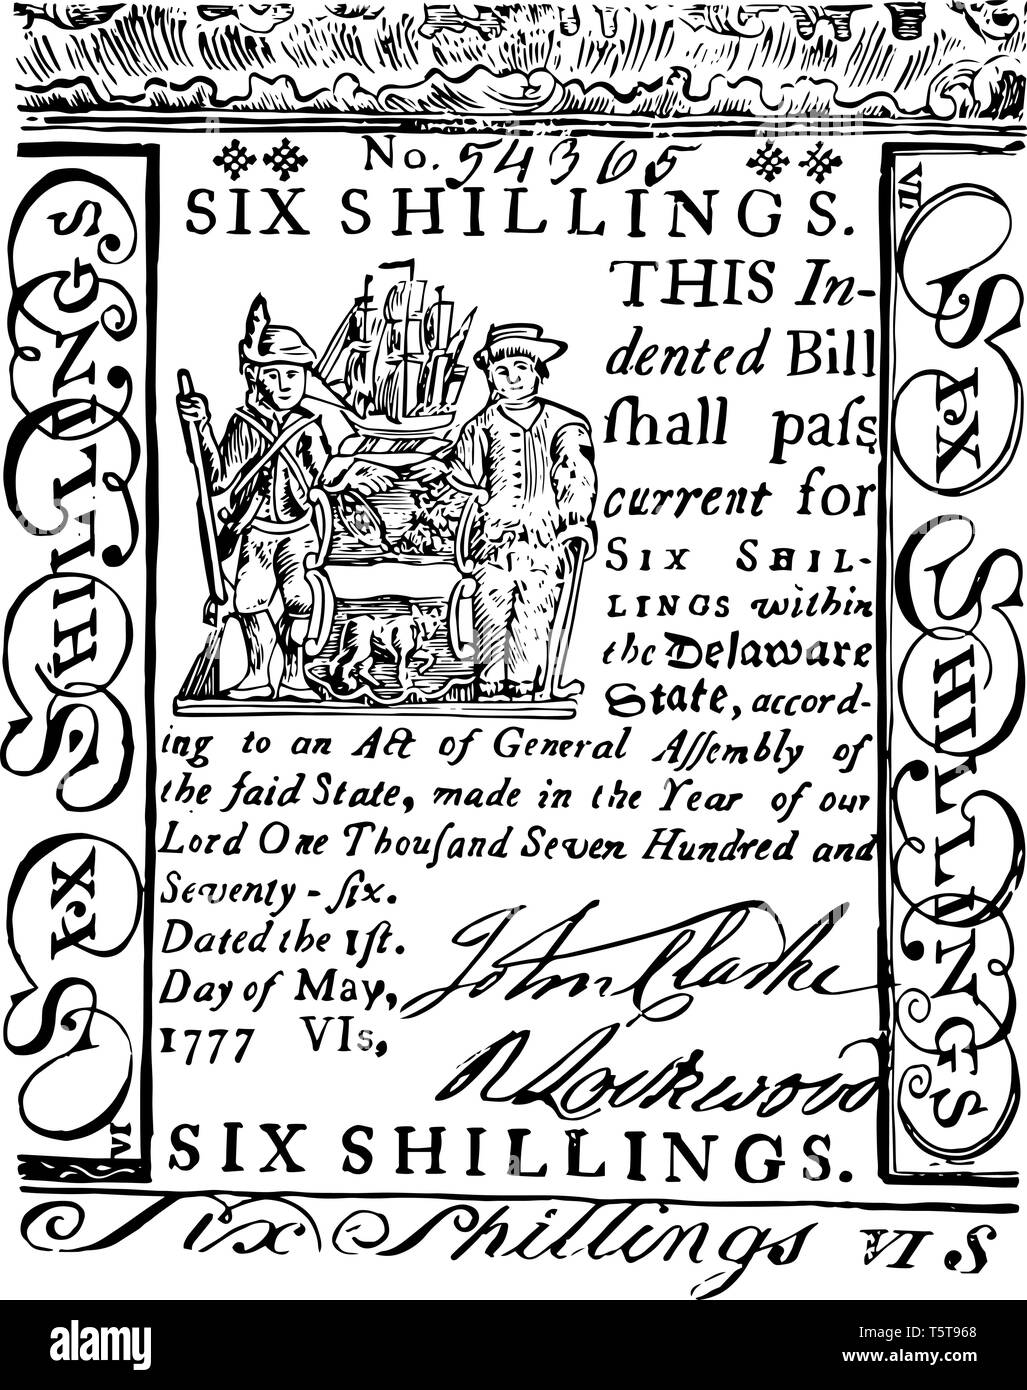 The picture showing a six shillings bill. Sailing ship on the left is in the image of ship, soldier, farmer, upper part of the bill, vintage line draw Stock Vector